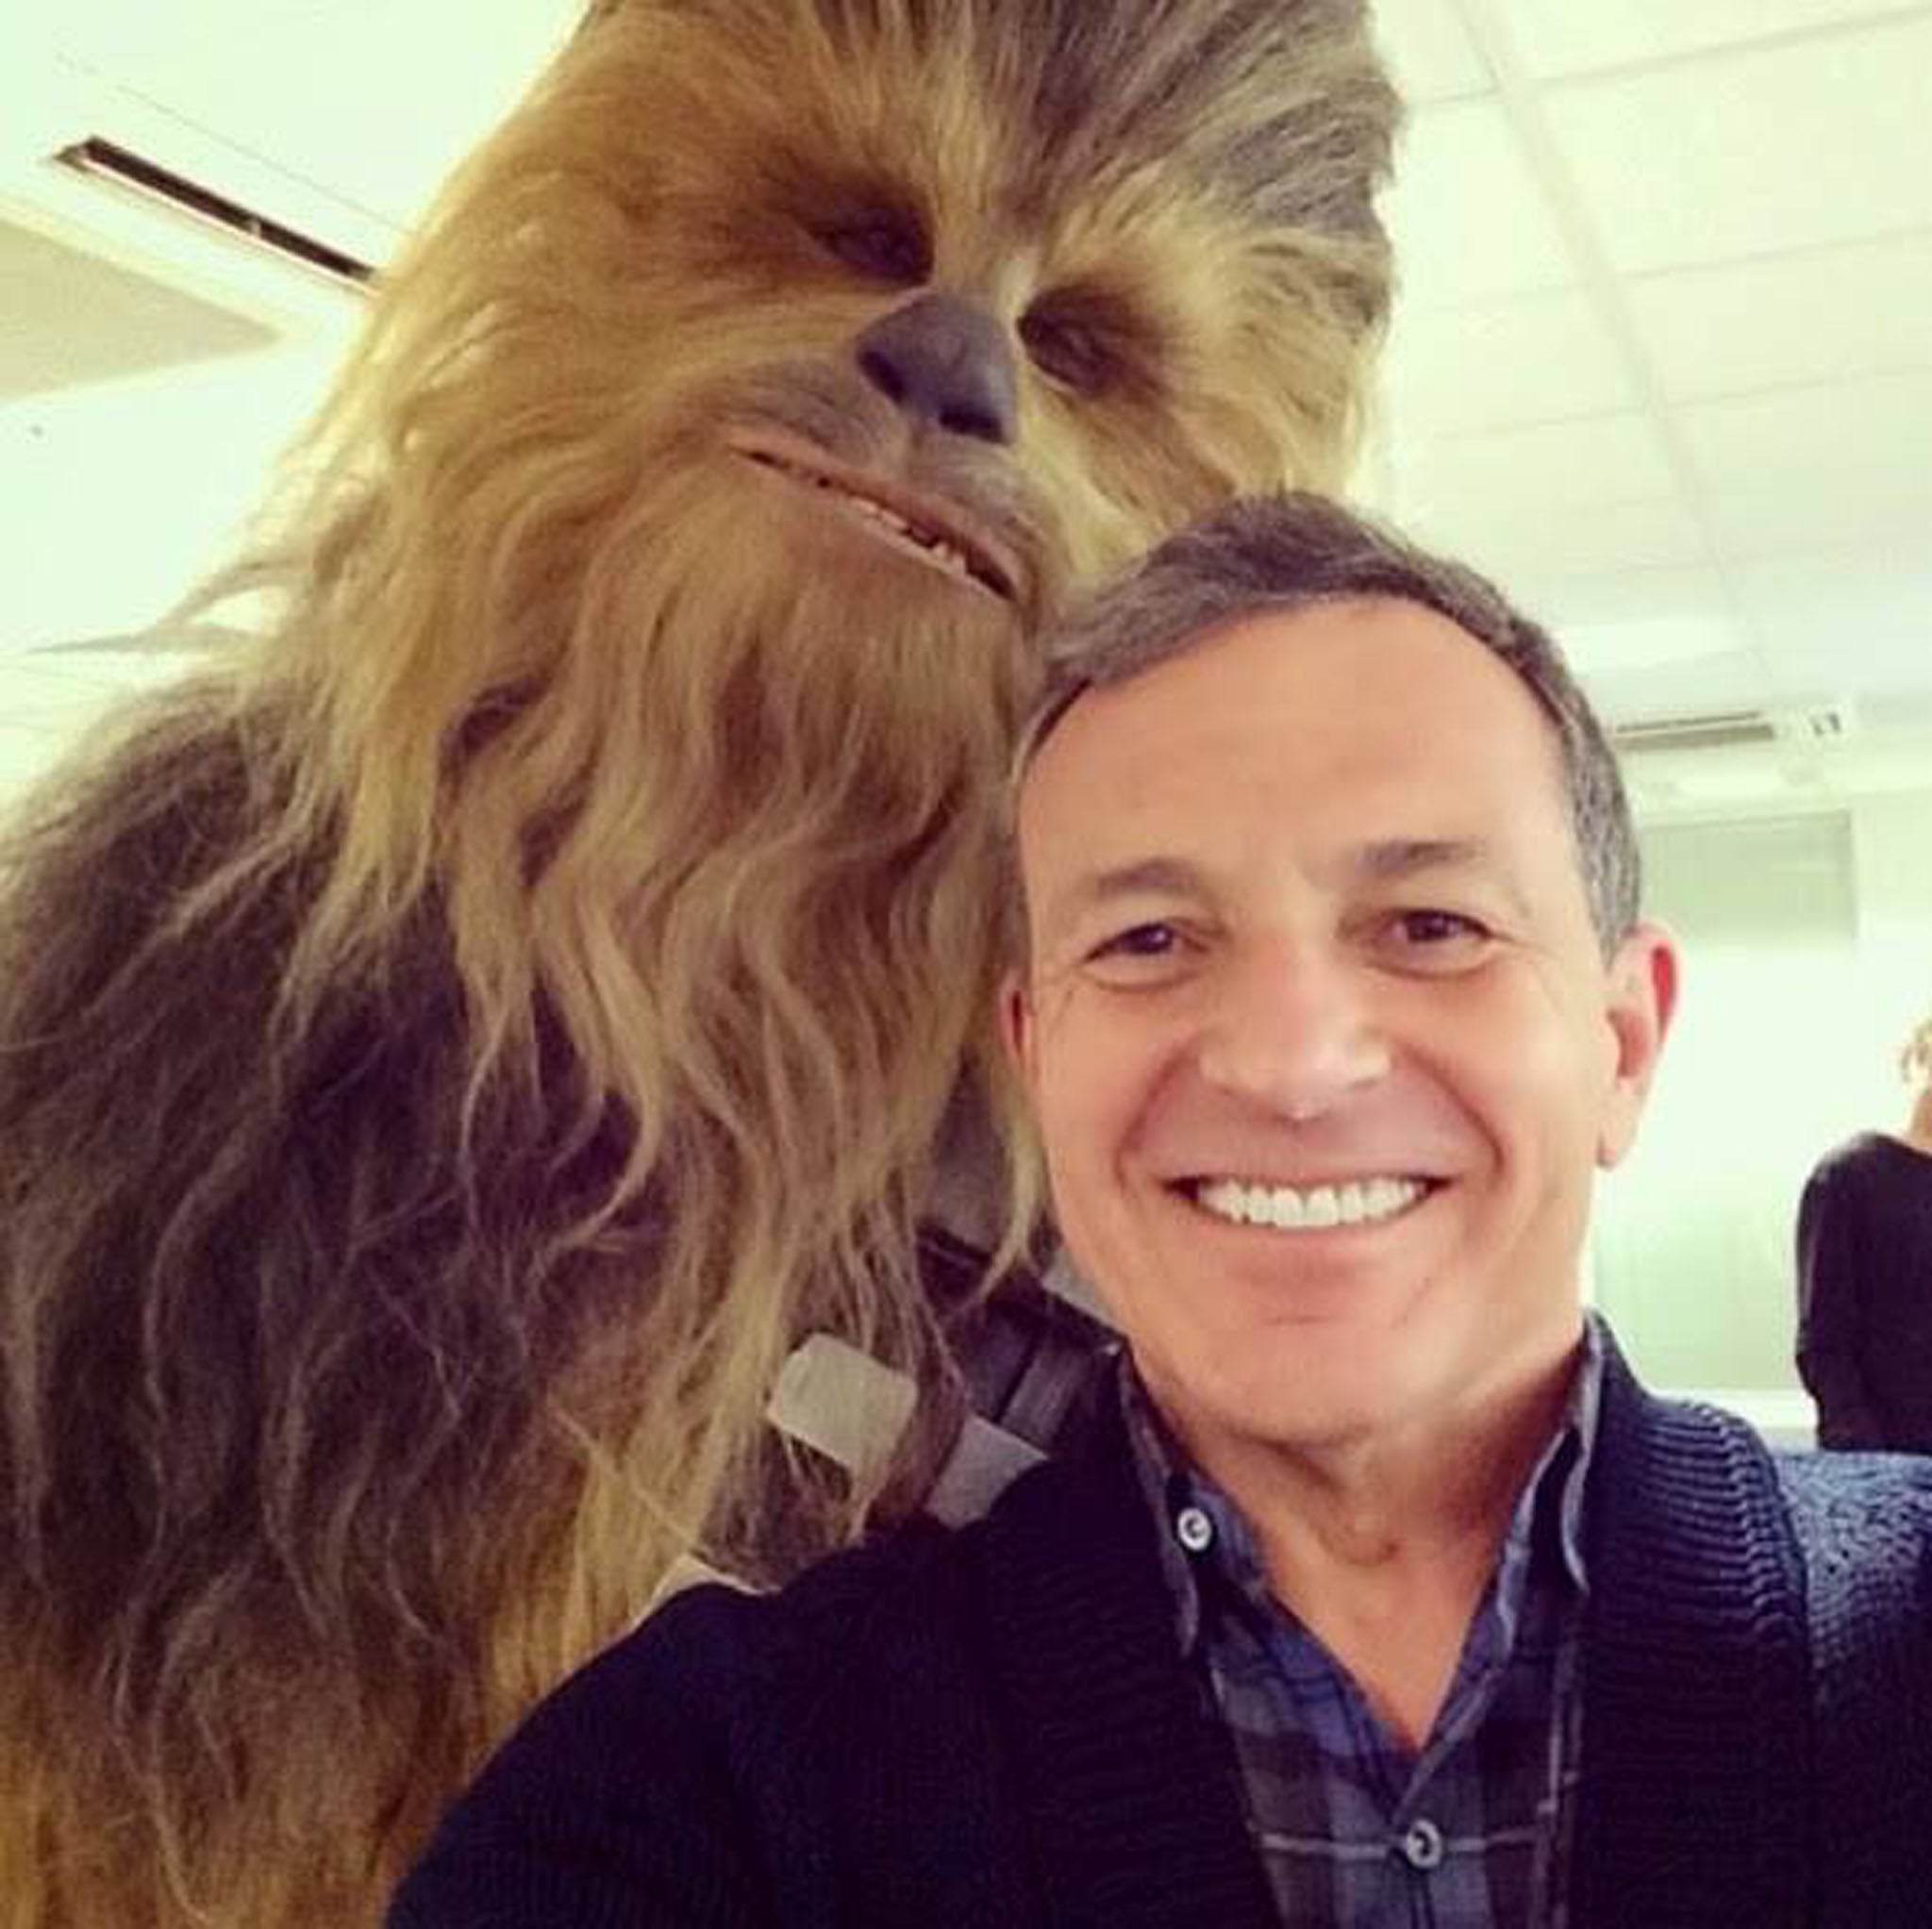 Bob Iger poses with Chewbacca to mark Star Wars Day